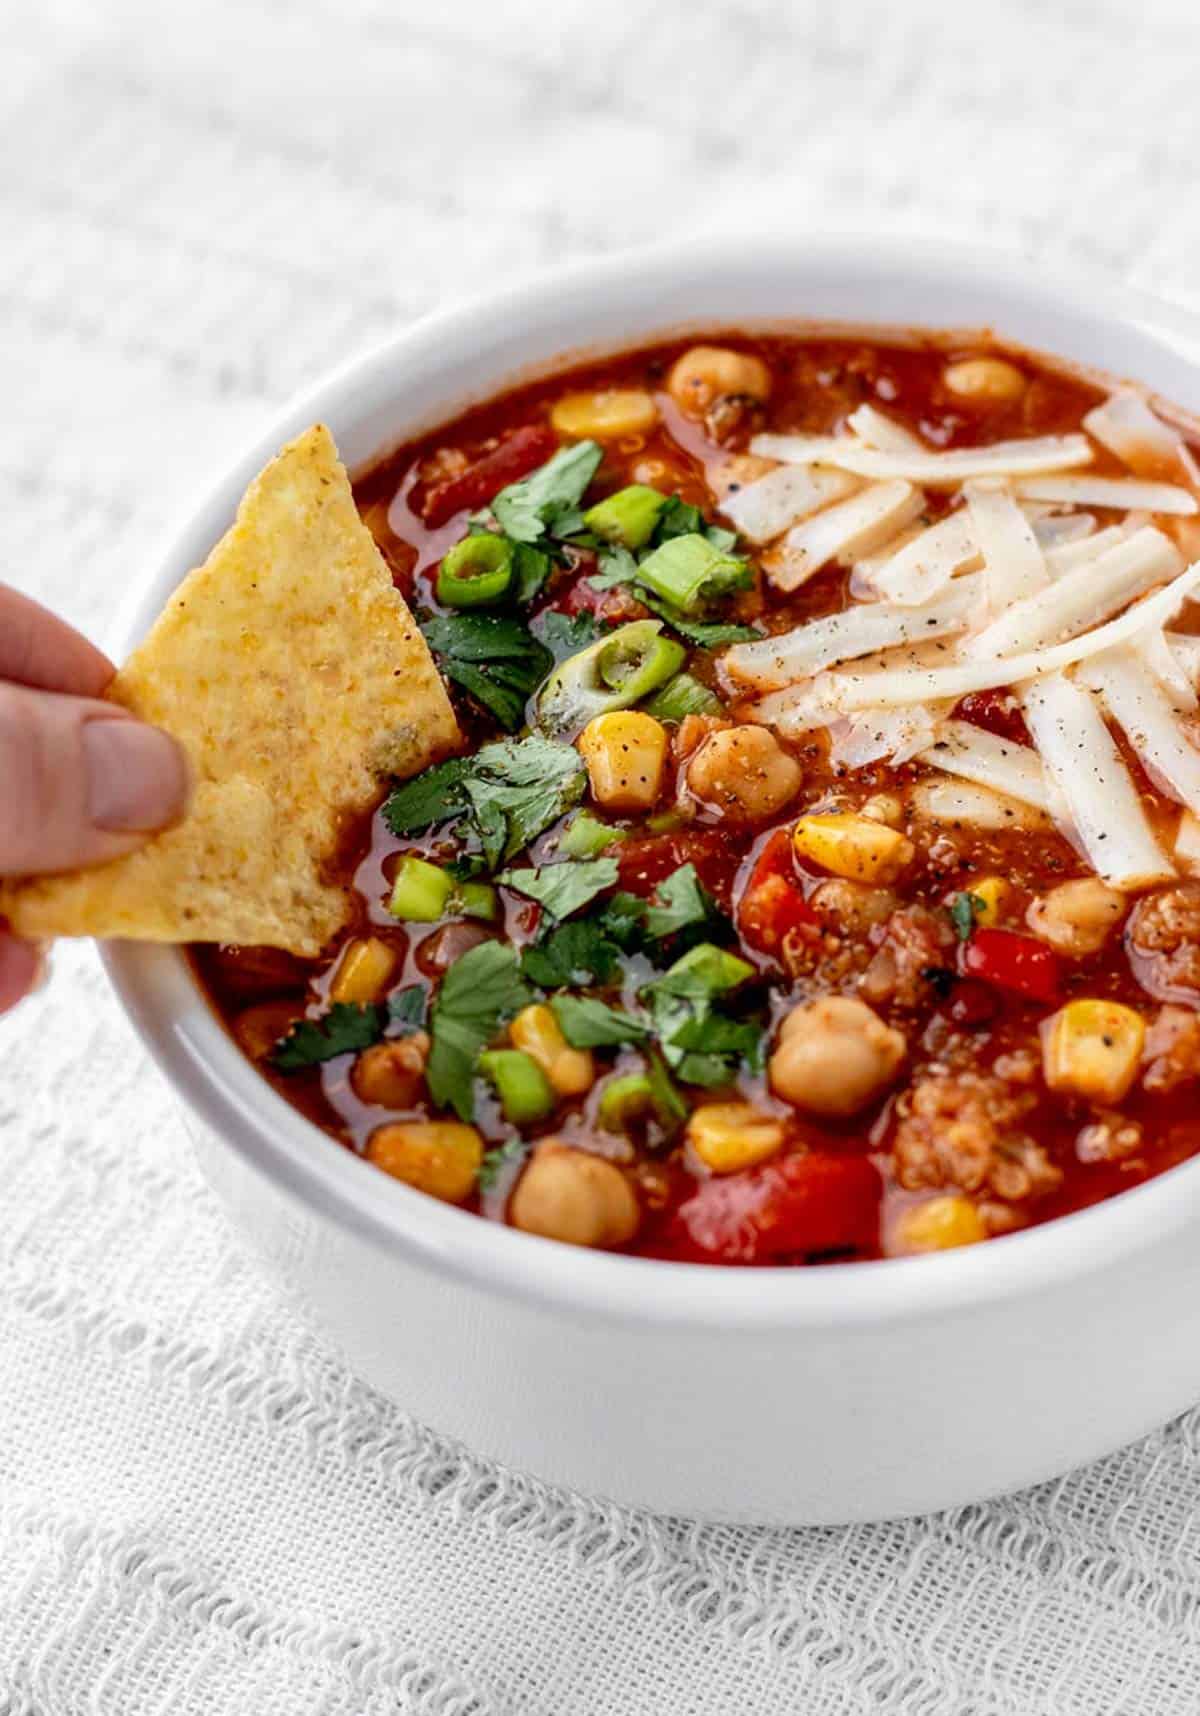 A tortilla chip dipping into Mexican soup with garbanzo beans.